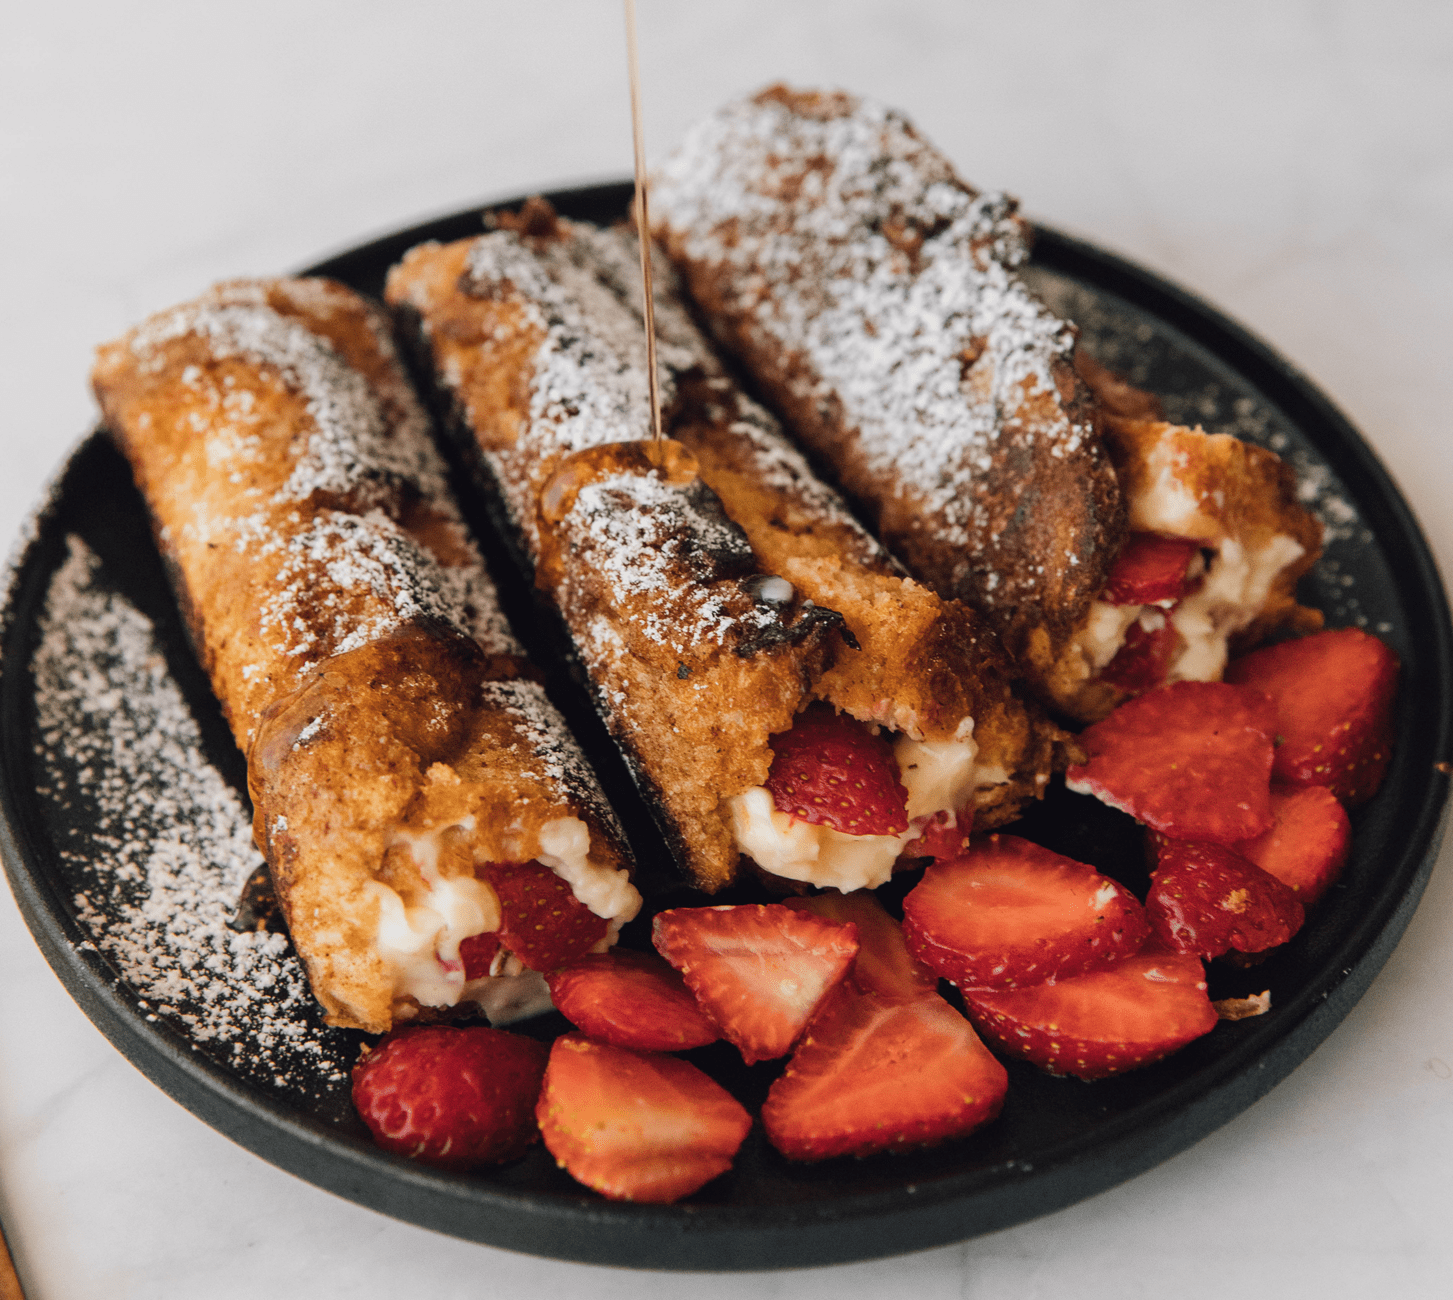 https://sweetpeaskitchen.com/wp-content/uploads/2021/03/Strawberry-Cream-Cheese-Stuffed-French-Toast-CARD.png